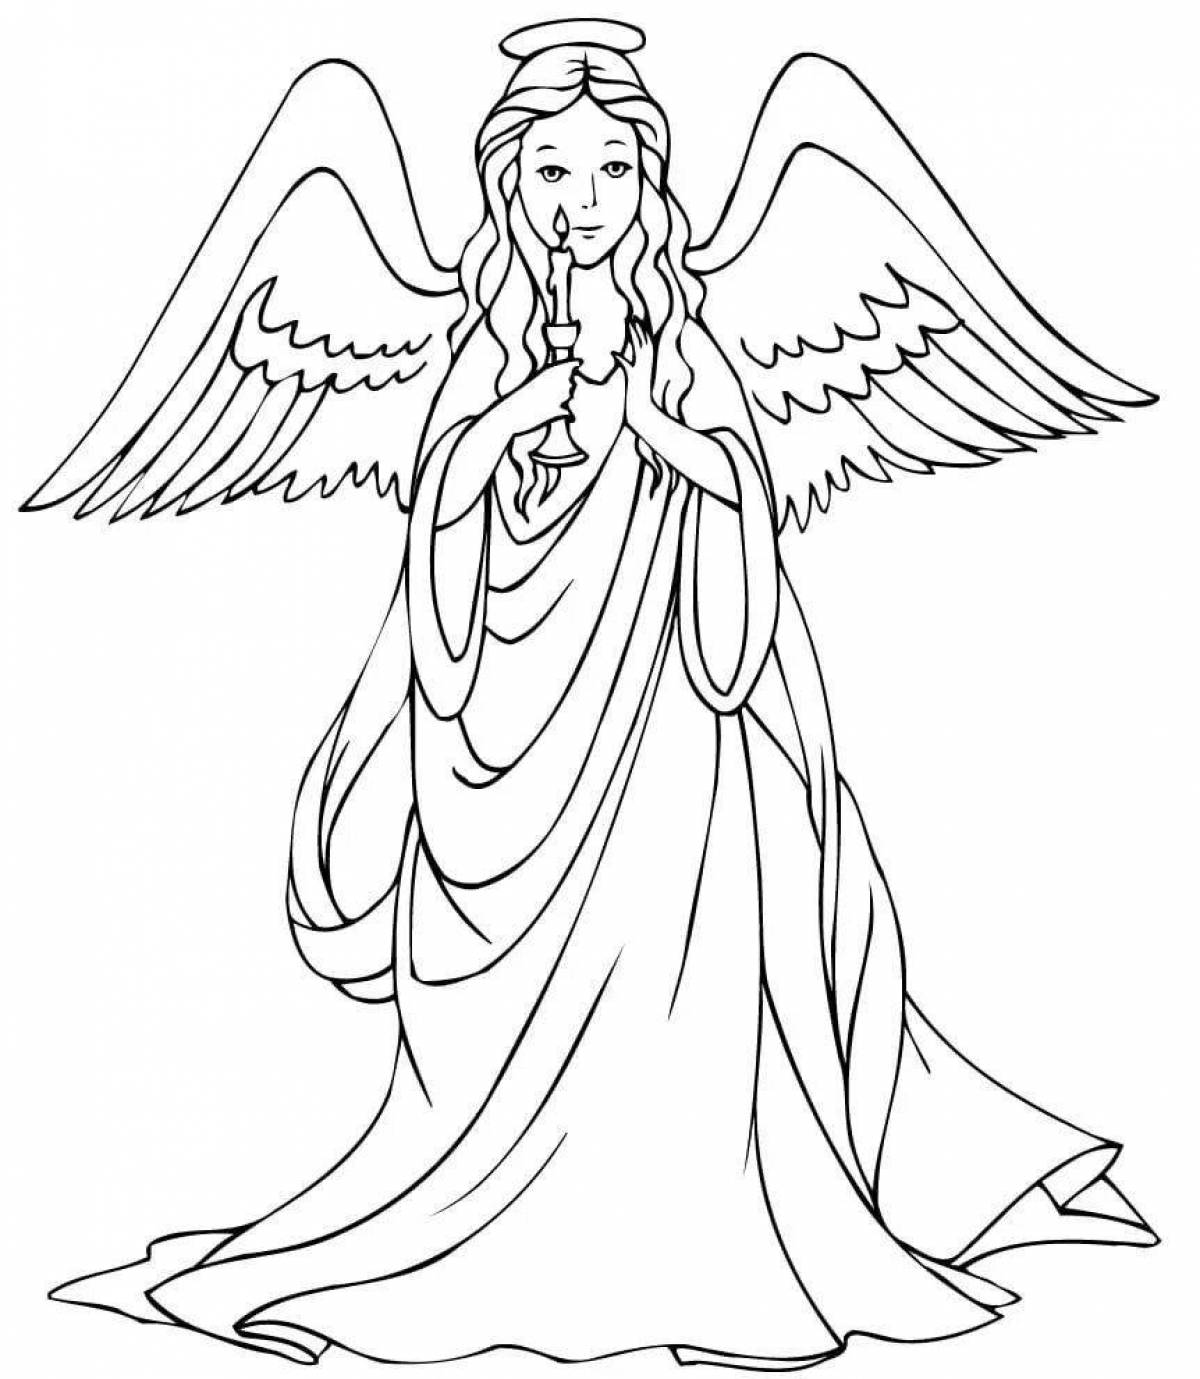 Angel face coloring book